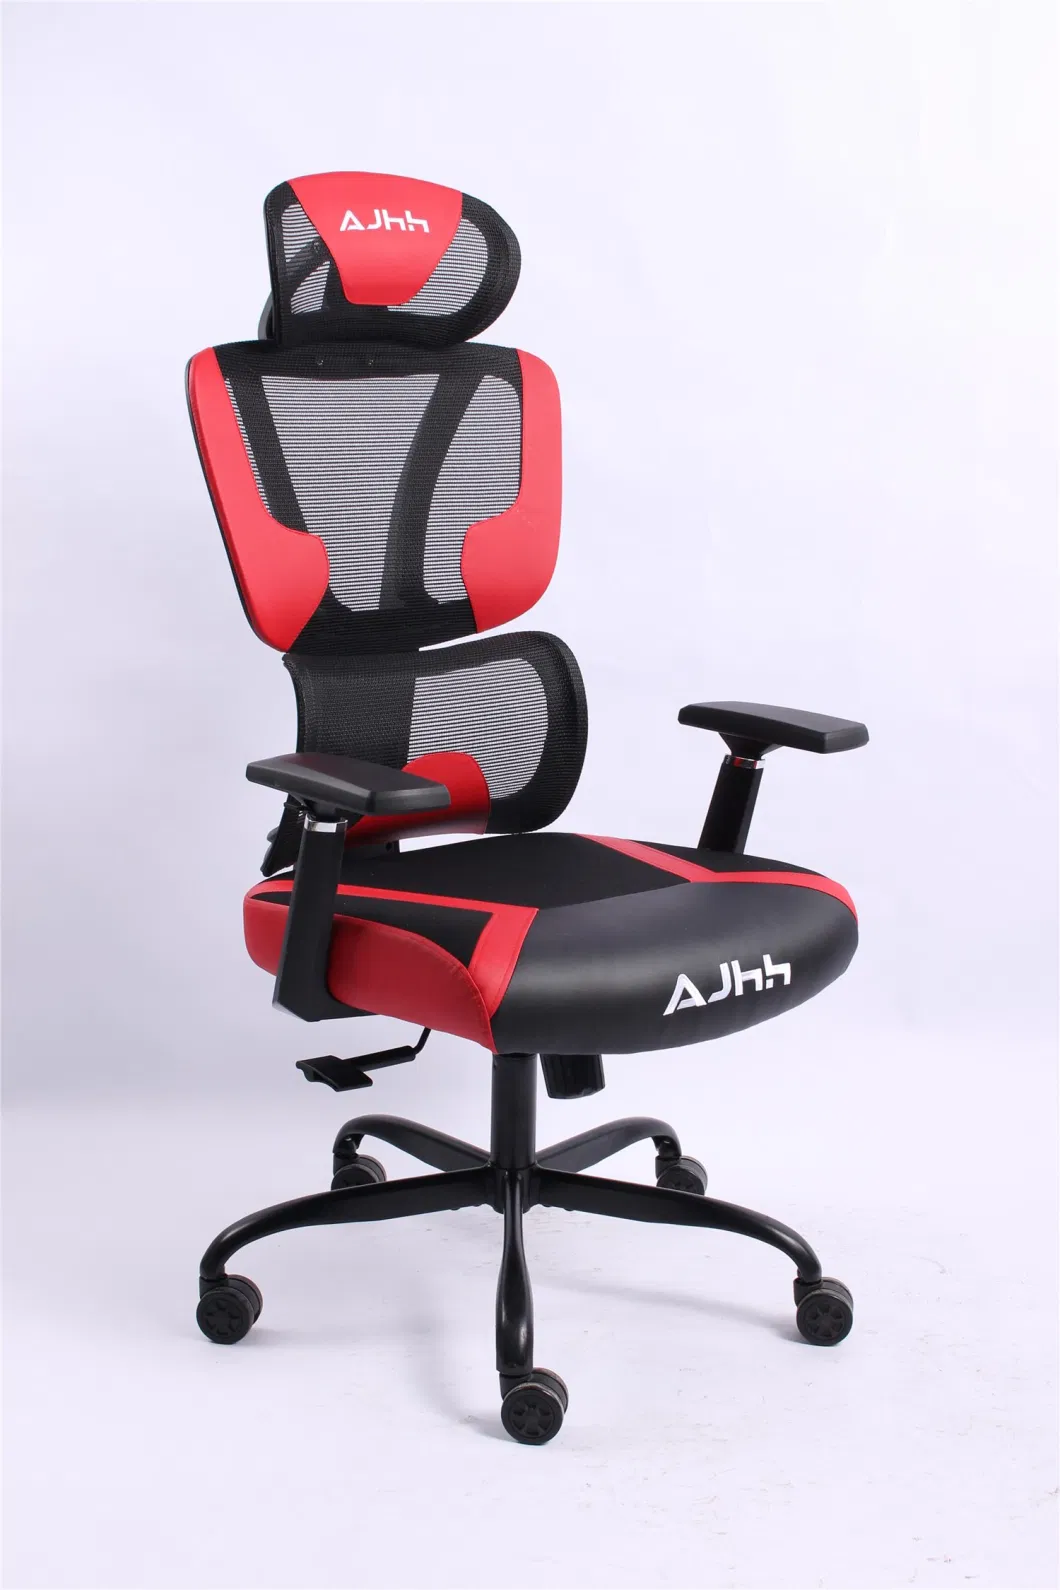 New Mesh Gaming Chair with Adjustable Lumbar Support and 3D Armrests for Home Gamer